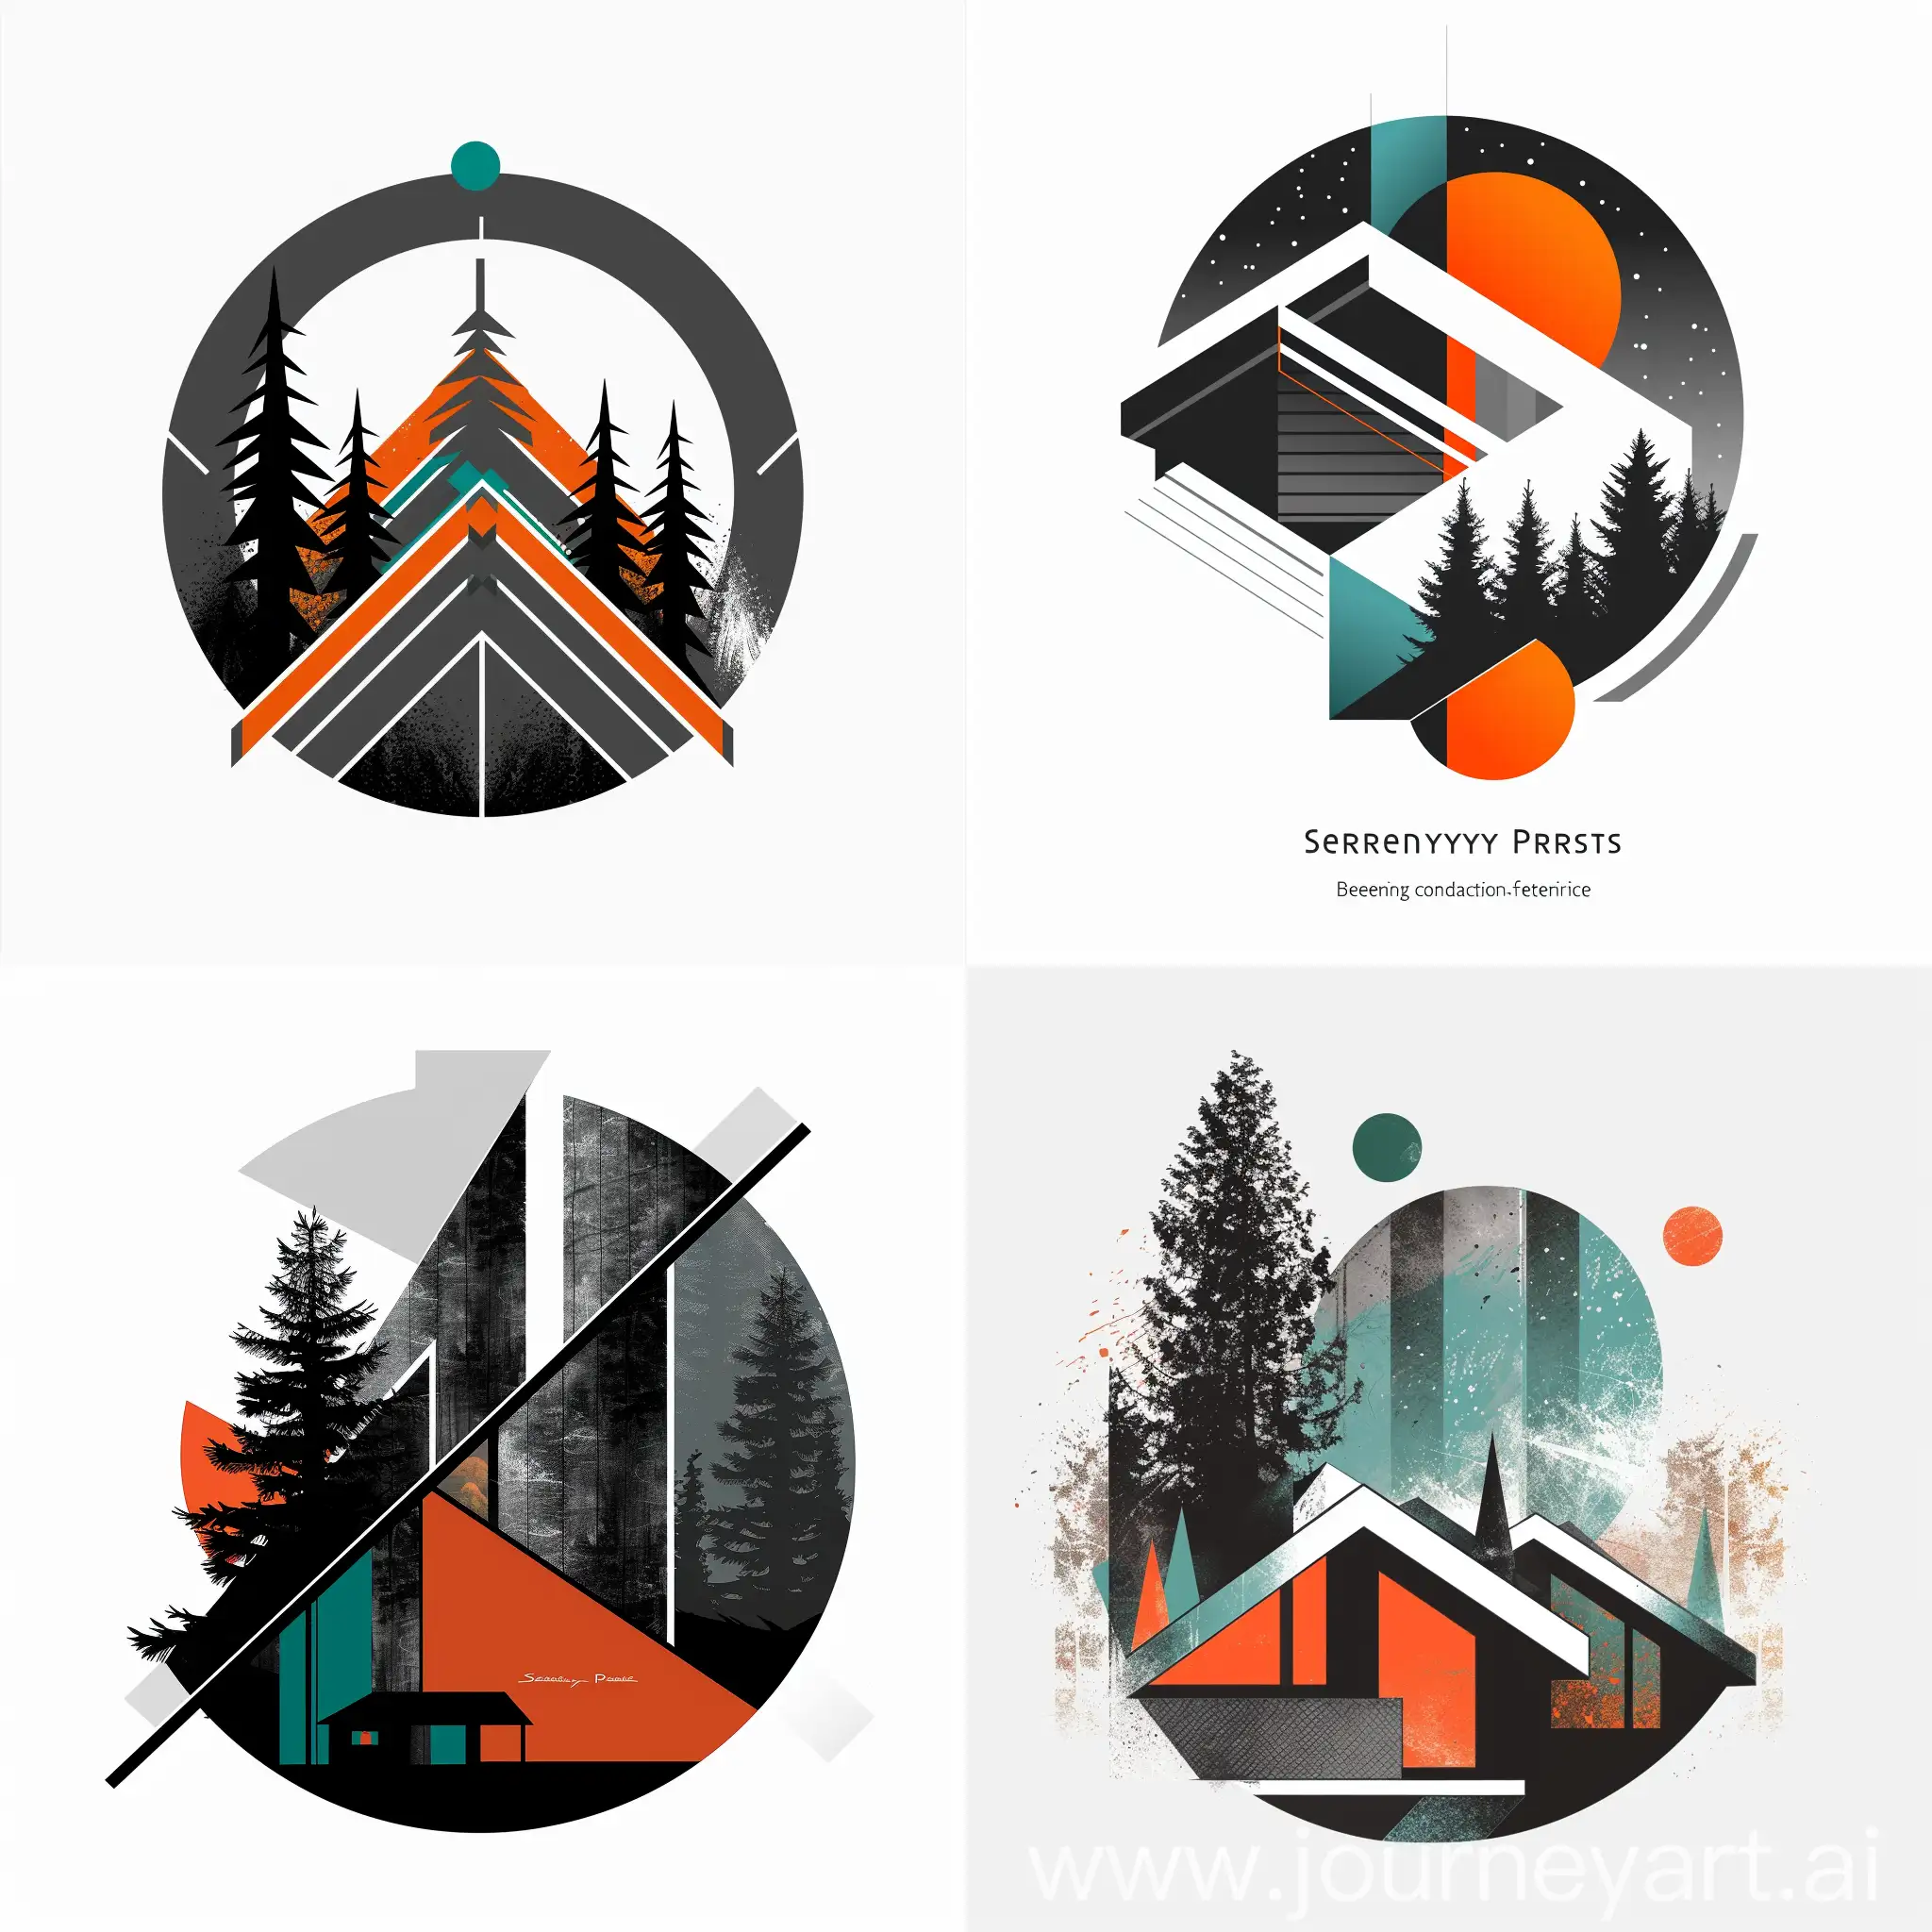 Modern and Eye-Catching - Cabins Rental Company Round (Circle shape with transparate or white background) Logotype fot Companys Website  Style: Bold geometric shapes with contrasting colors. Image: An abstract representation of a cabin roofline with a stylized tree incorporated into the design. Company Name: "Serenity Pines" Additional Notes: Use a striking color palette like charcoal grey with a vibrant orange or turquoise accent with white background.  Be Specific: The more detail you provide, the better the results. Keywords: Include keywords like "cozy", "rustic", "modern", "nature" to guide the AI's style. Iterate: Generate several variations on each prompt, playing with different color palettes and minor adjustments.